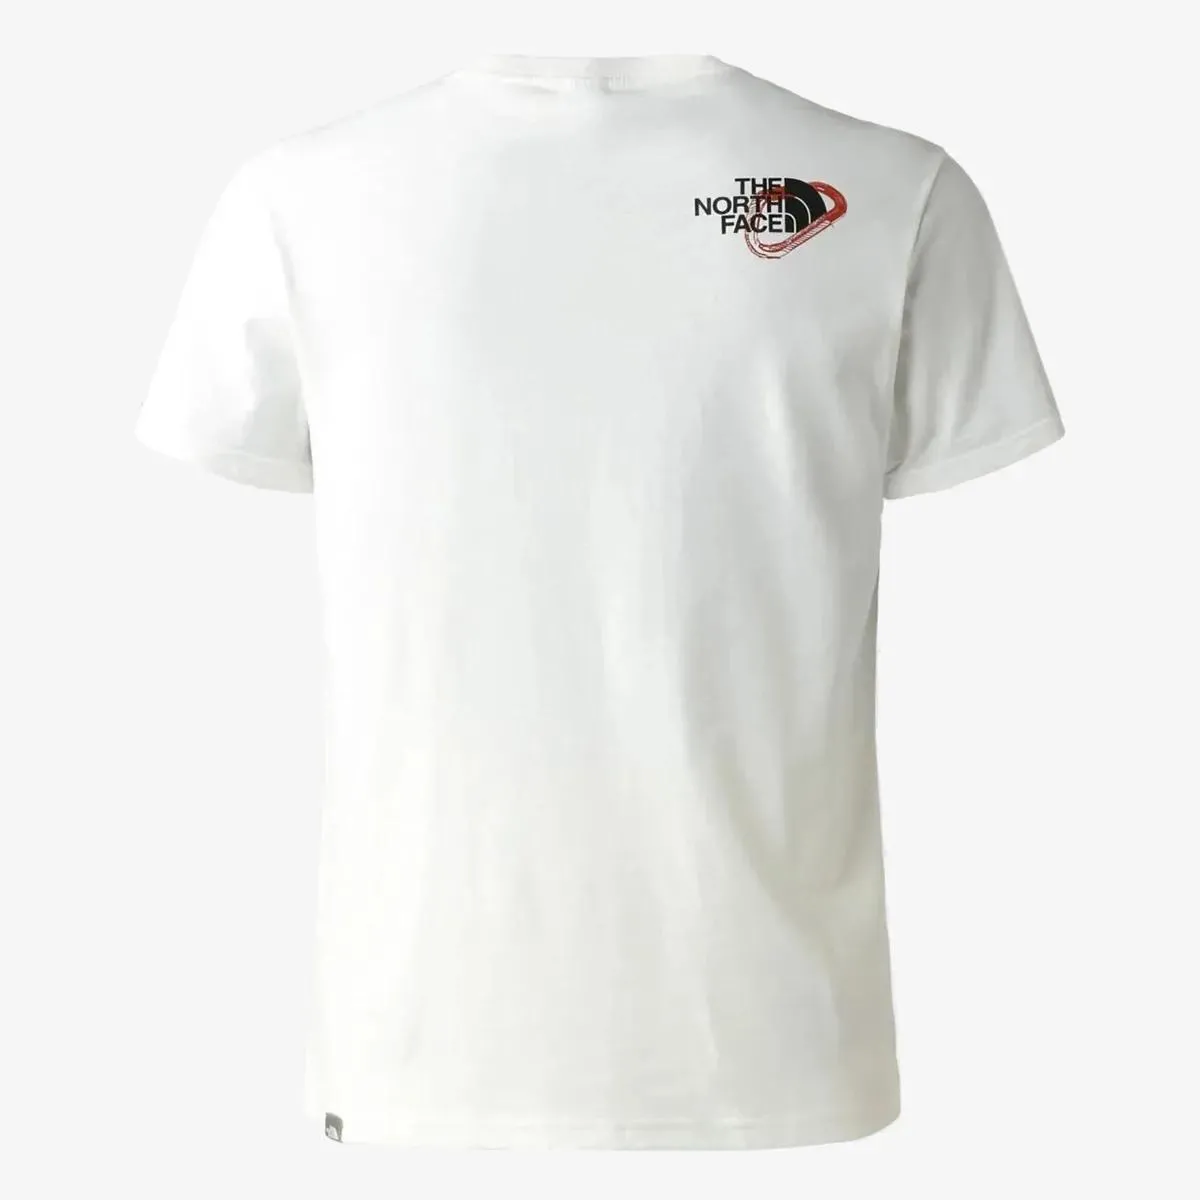 The North Face T-shirt Men’s Outdoor S/S Graphic Tee 